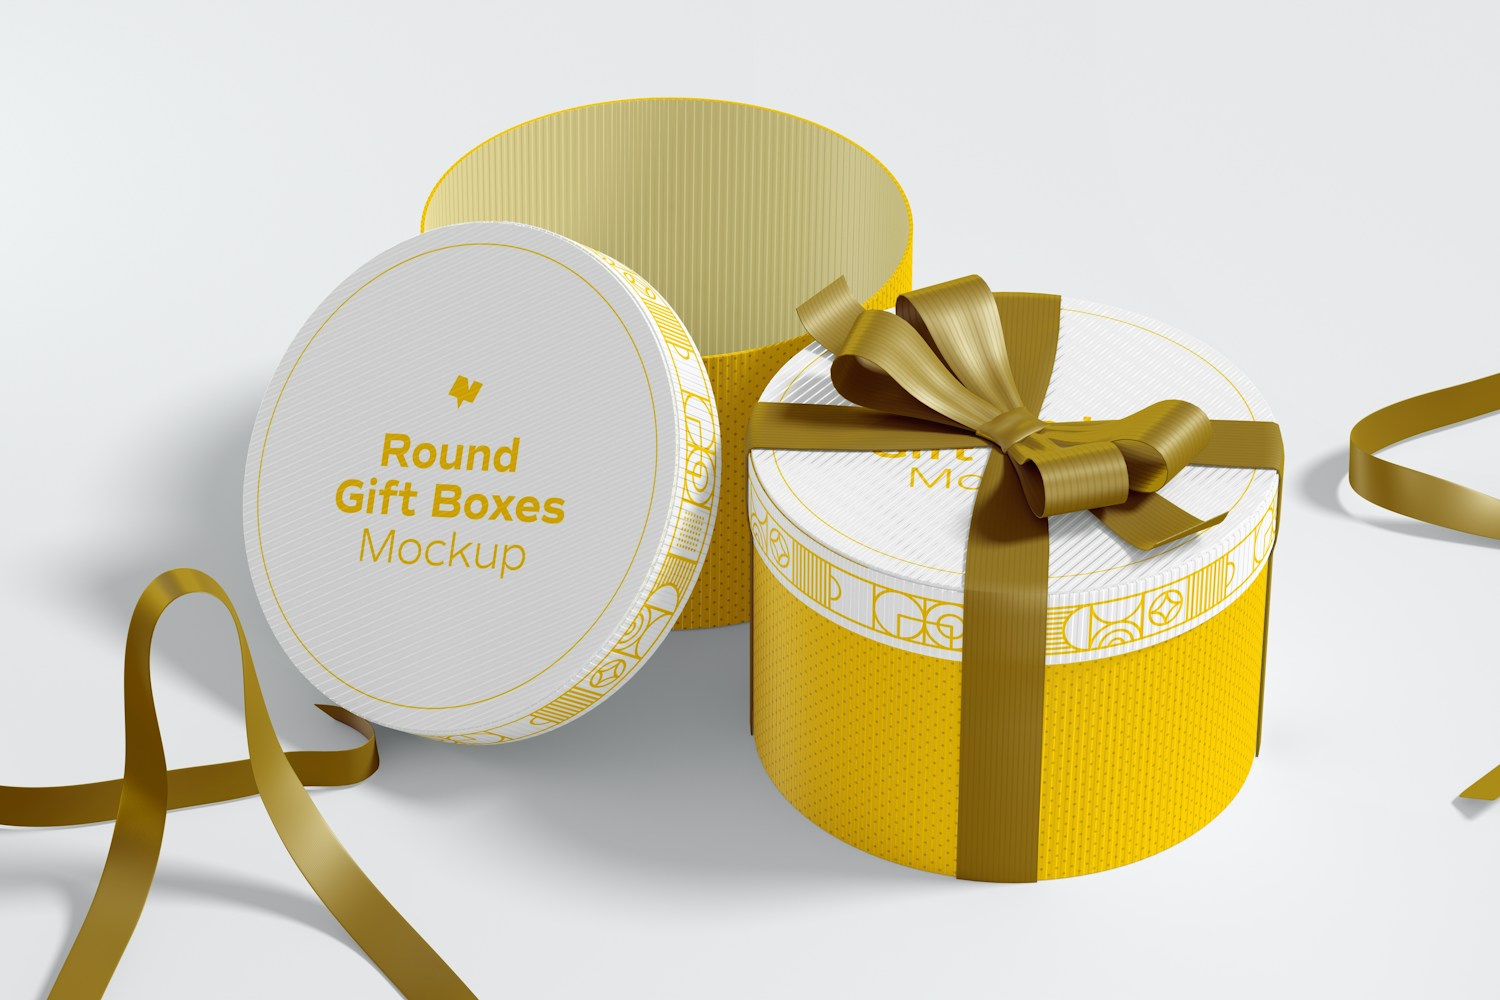 Round Gift Boxes with Ribbon Mockup, Opened and Closed